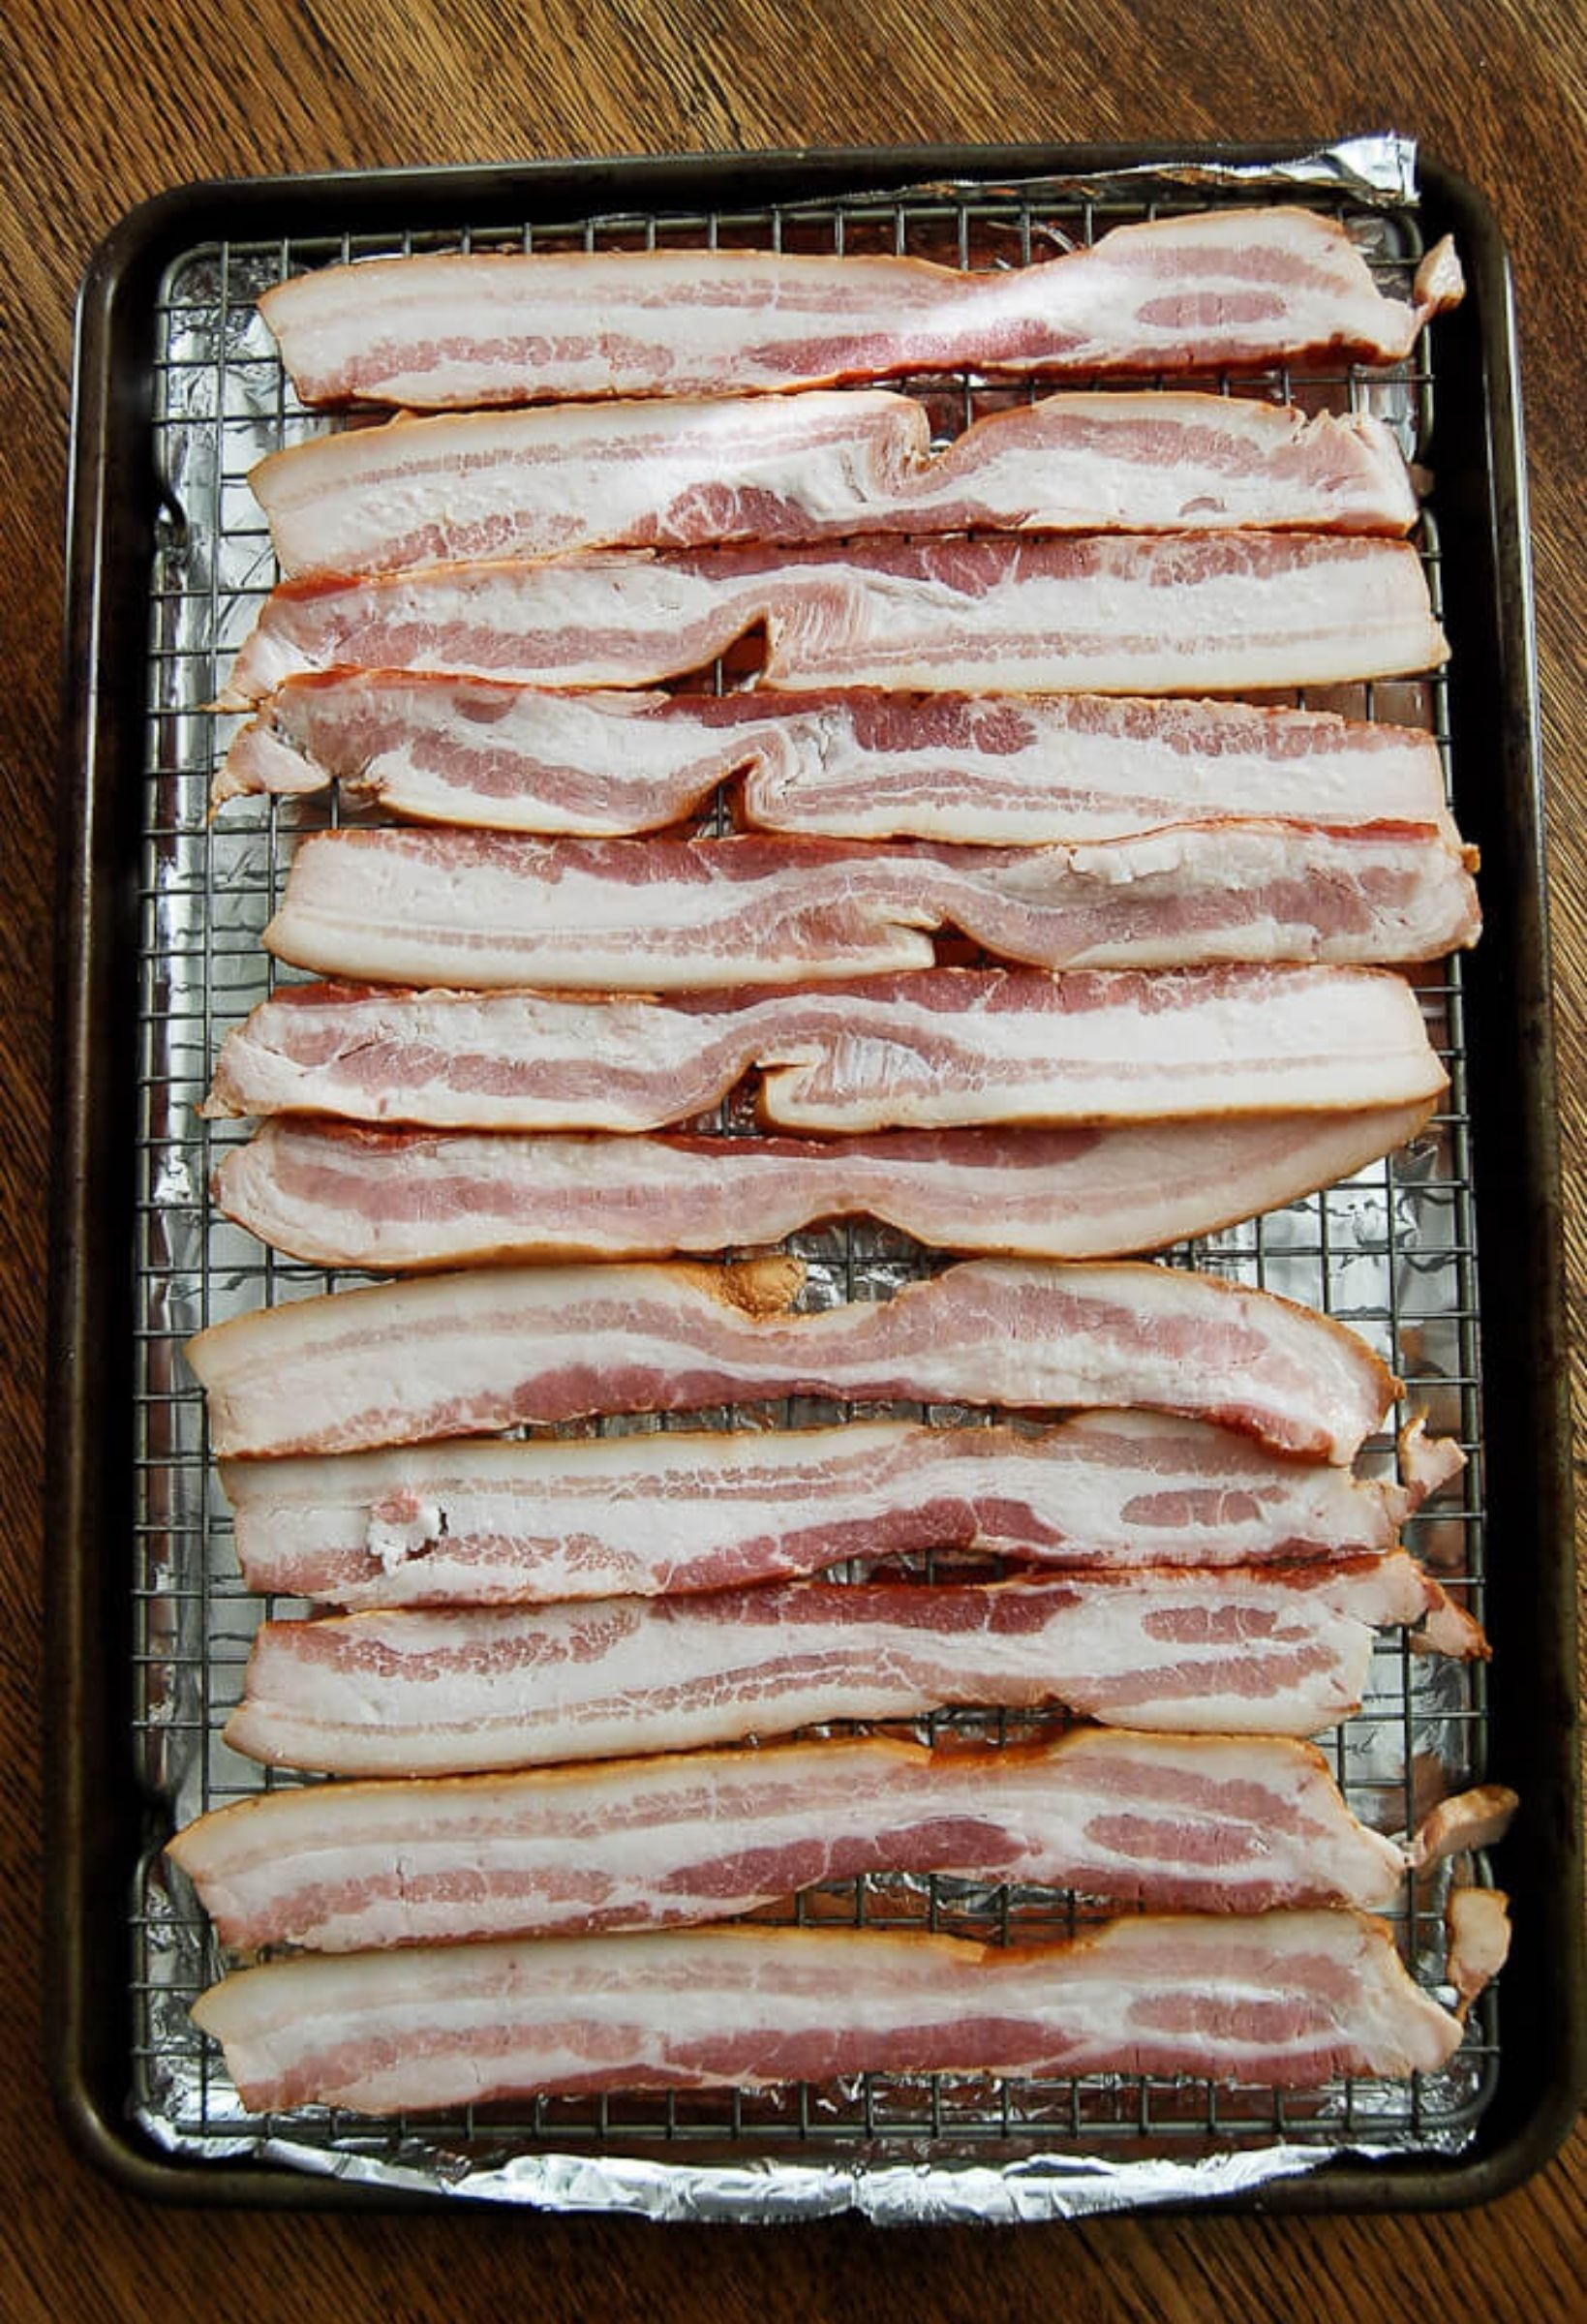 Raw bacon, ready to go into the oven.